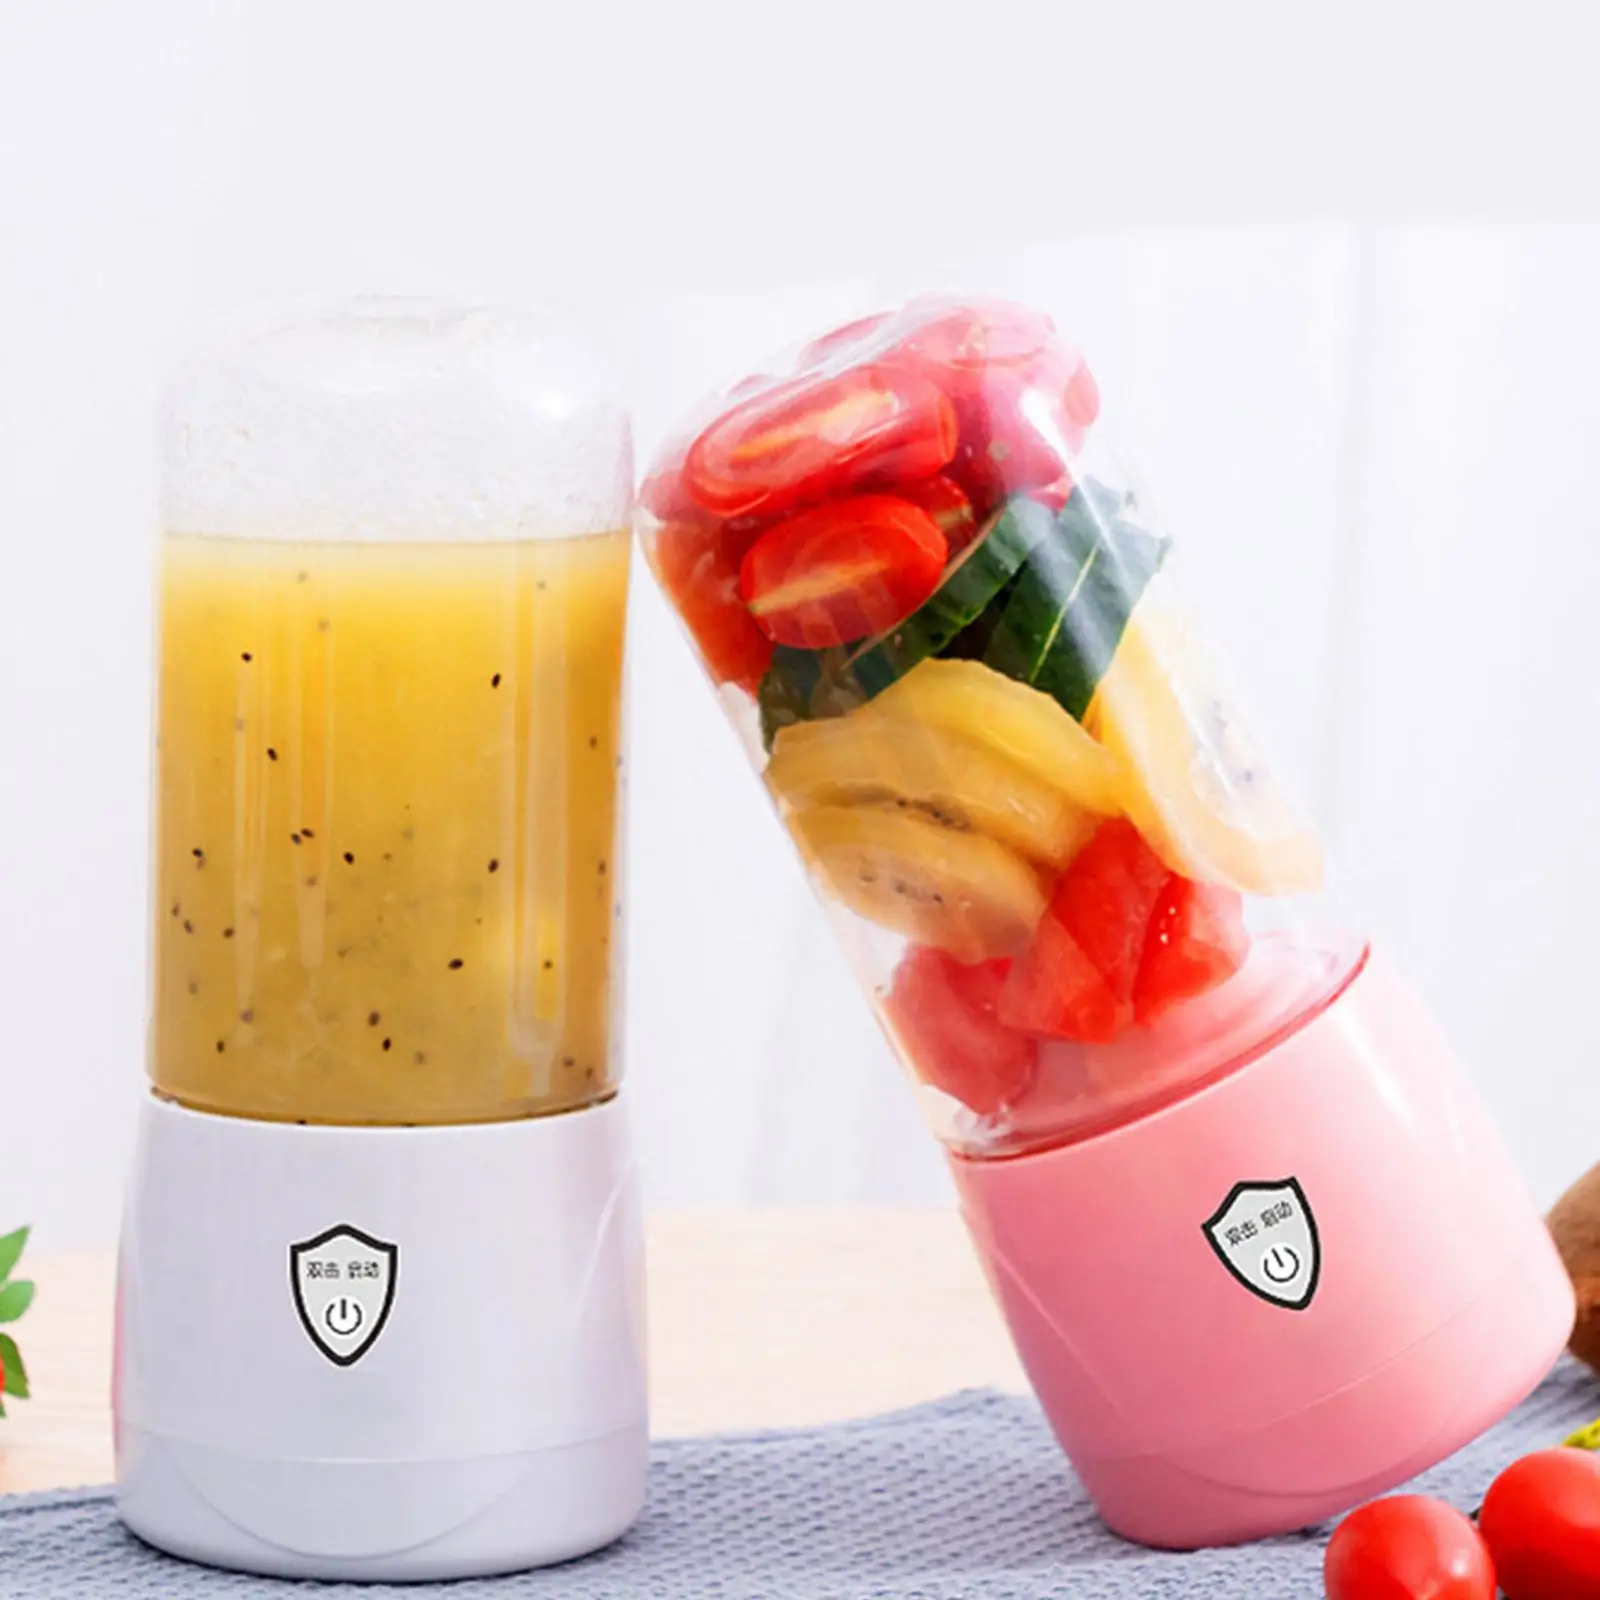 Portable Blender Electric Rechargeable Strong Power Food Processor for Hiking Work